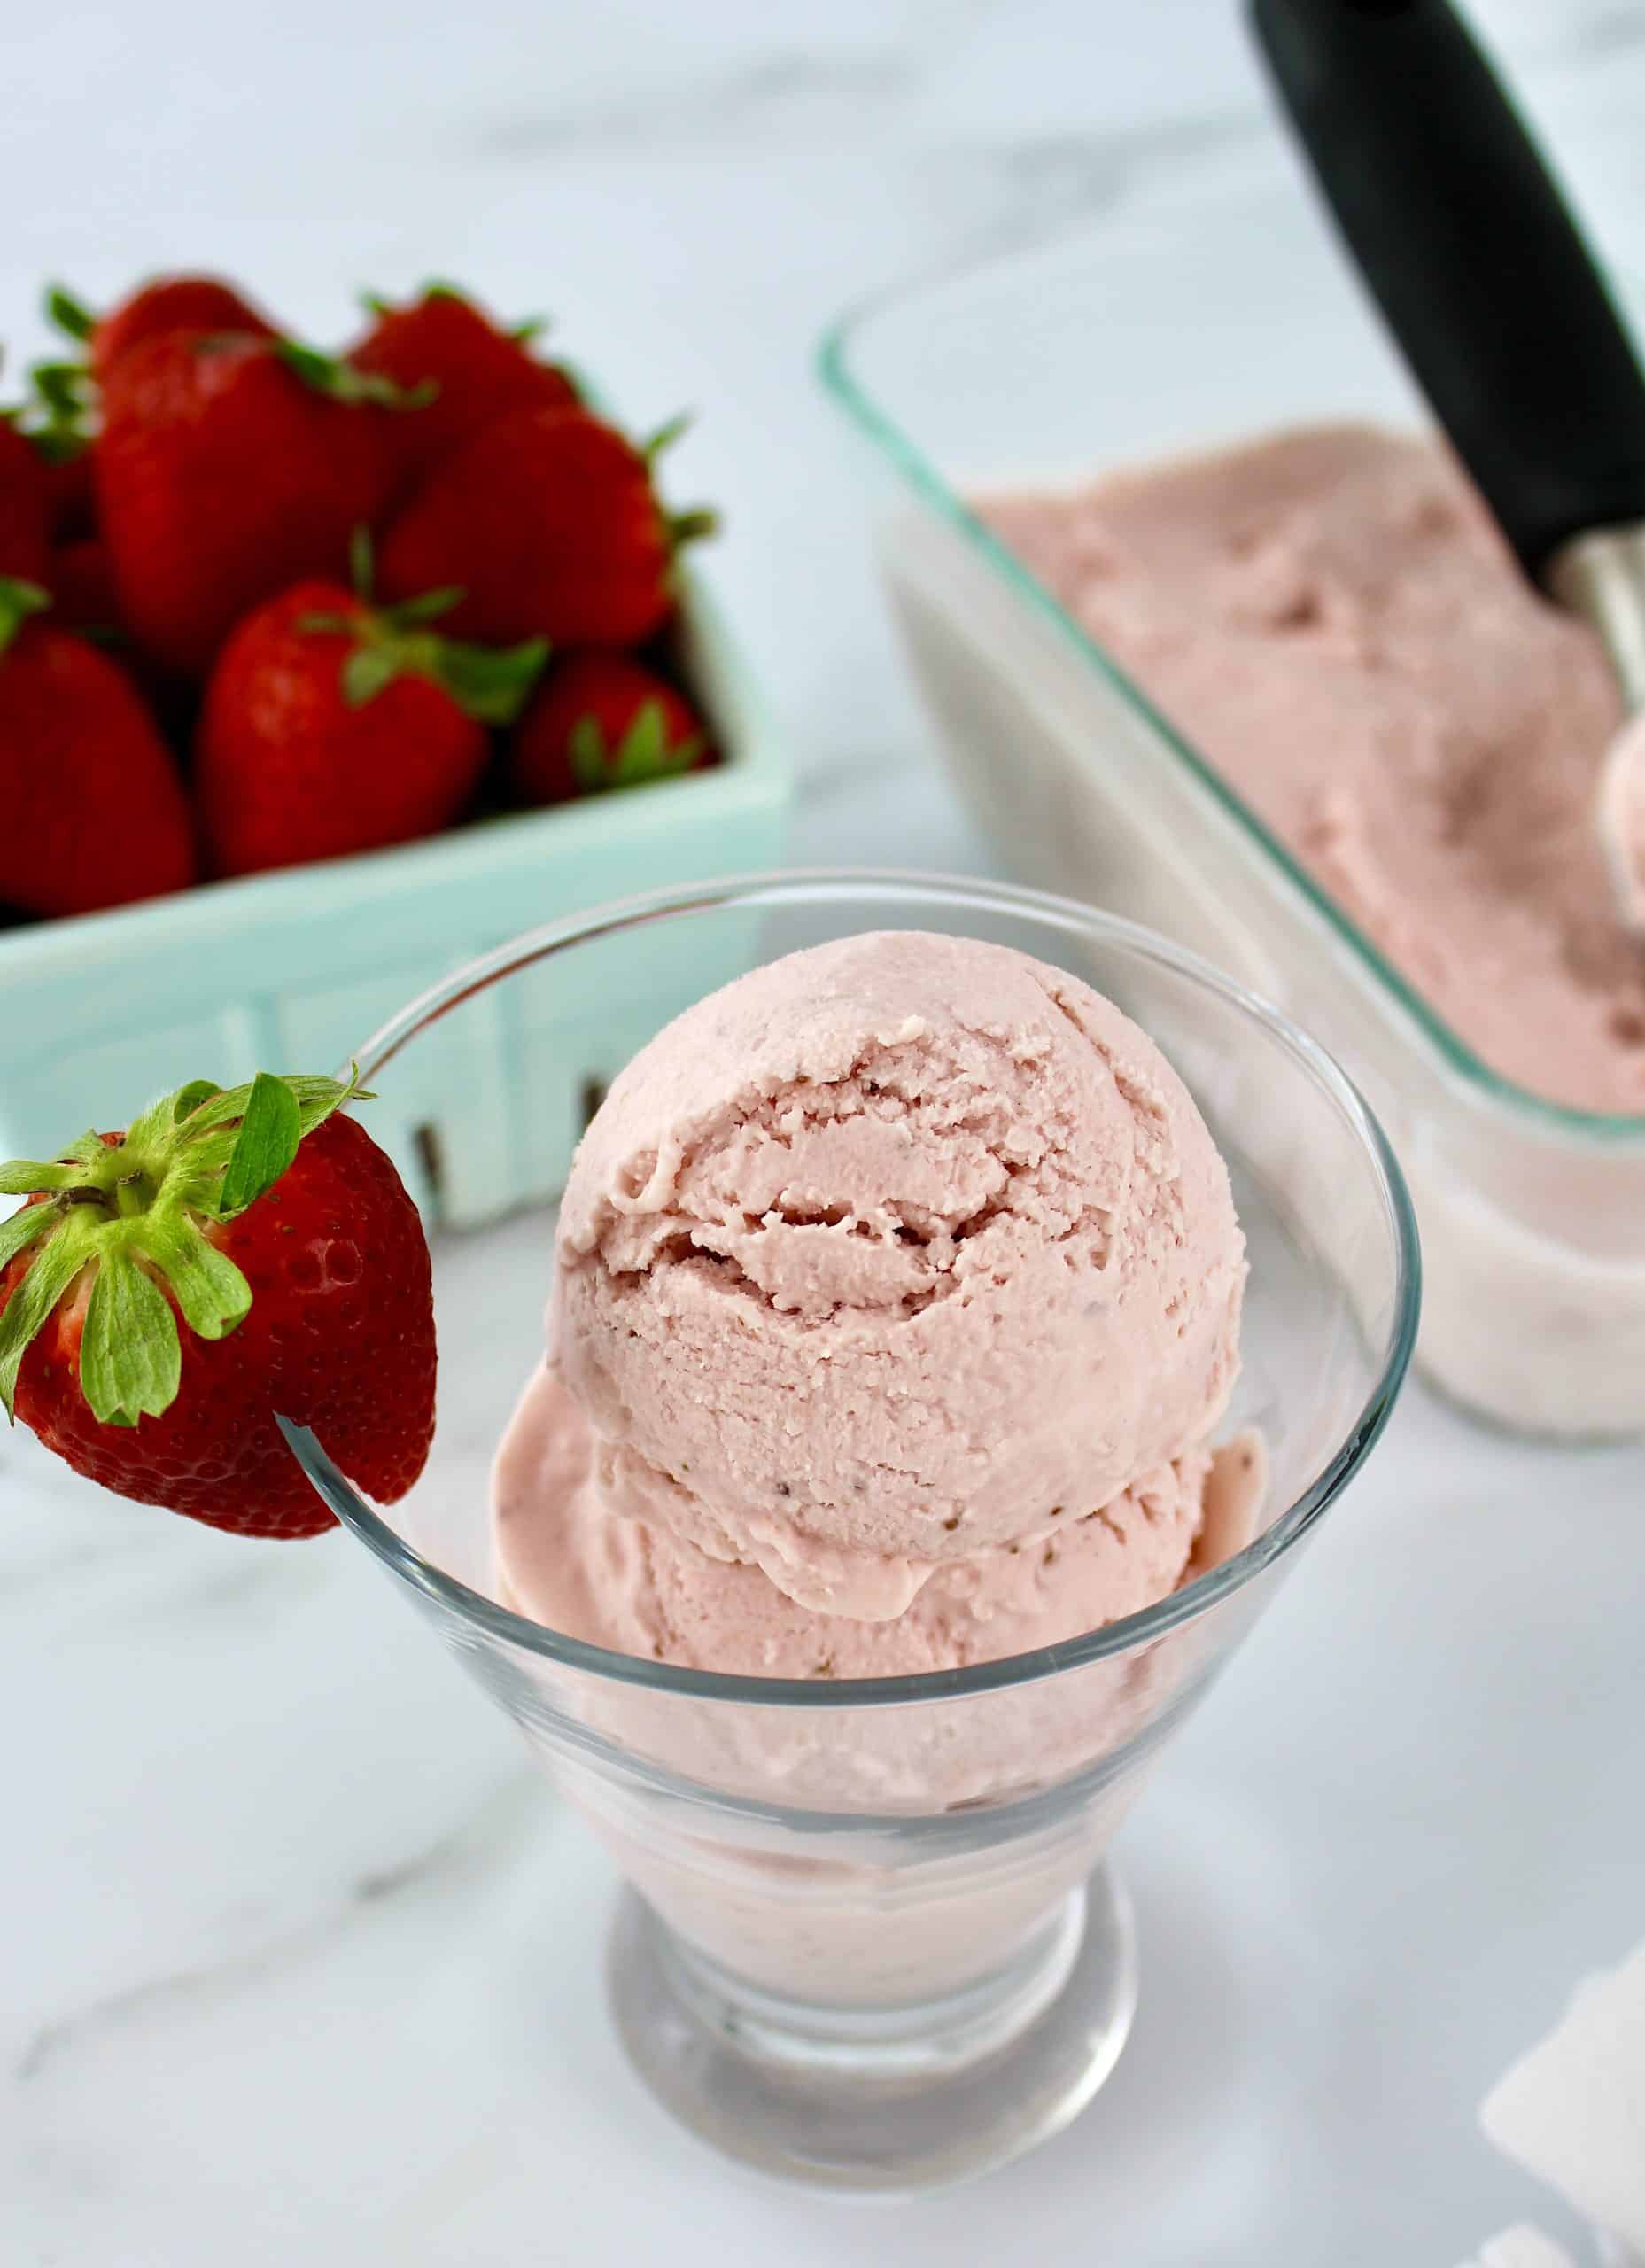 No Churn Keto Strawberry Ice Cream in glass dish with strawberries in background